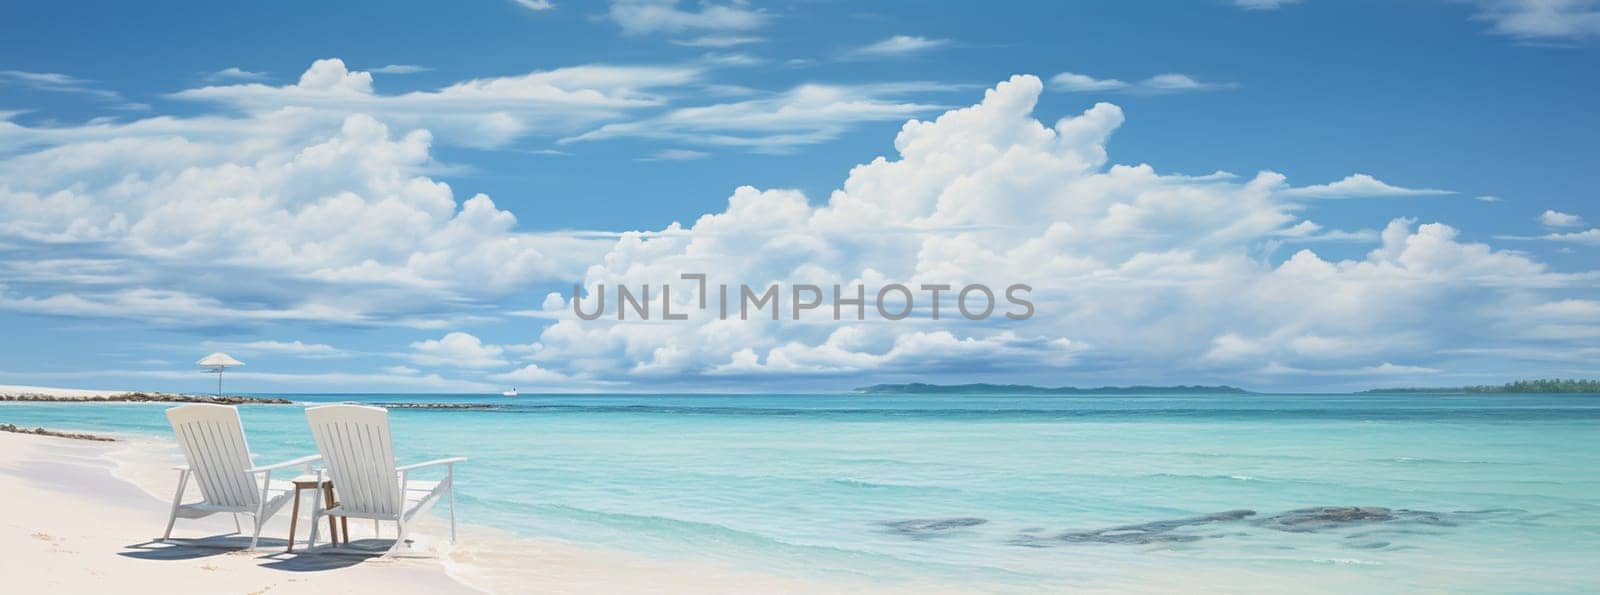 Sea Background Shore Blue Water White Sky Season Summer Tropical Ocean Beautiful Wave Seascape Vacation Smooth Wallpaper Island Outdoor Tropical Coast Sandy Nature Landscape Space for Travel Relax. by Andelov13